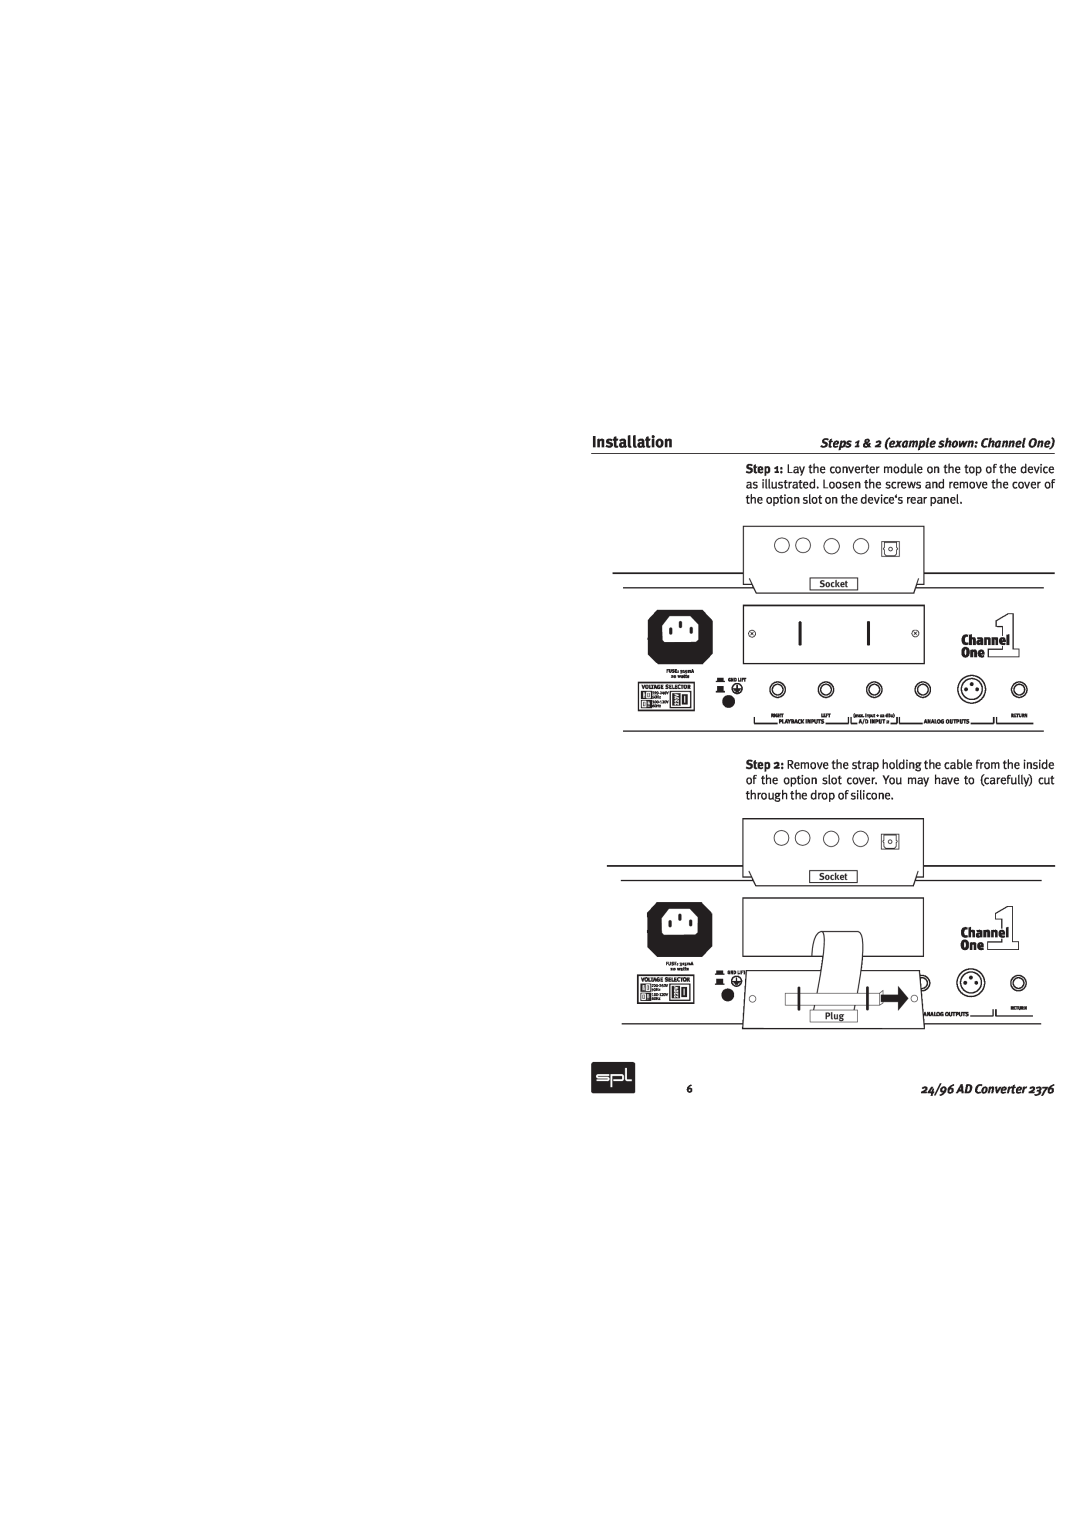 Sound Performance Lab 2376 owner manual Installation, Steps 1 & 2 example shown Channel One, 24/96 AD Converter 